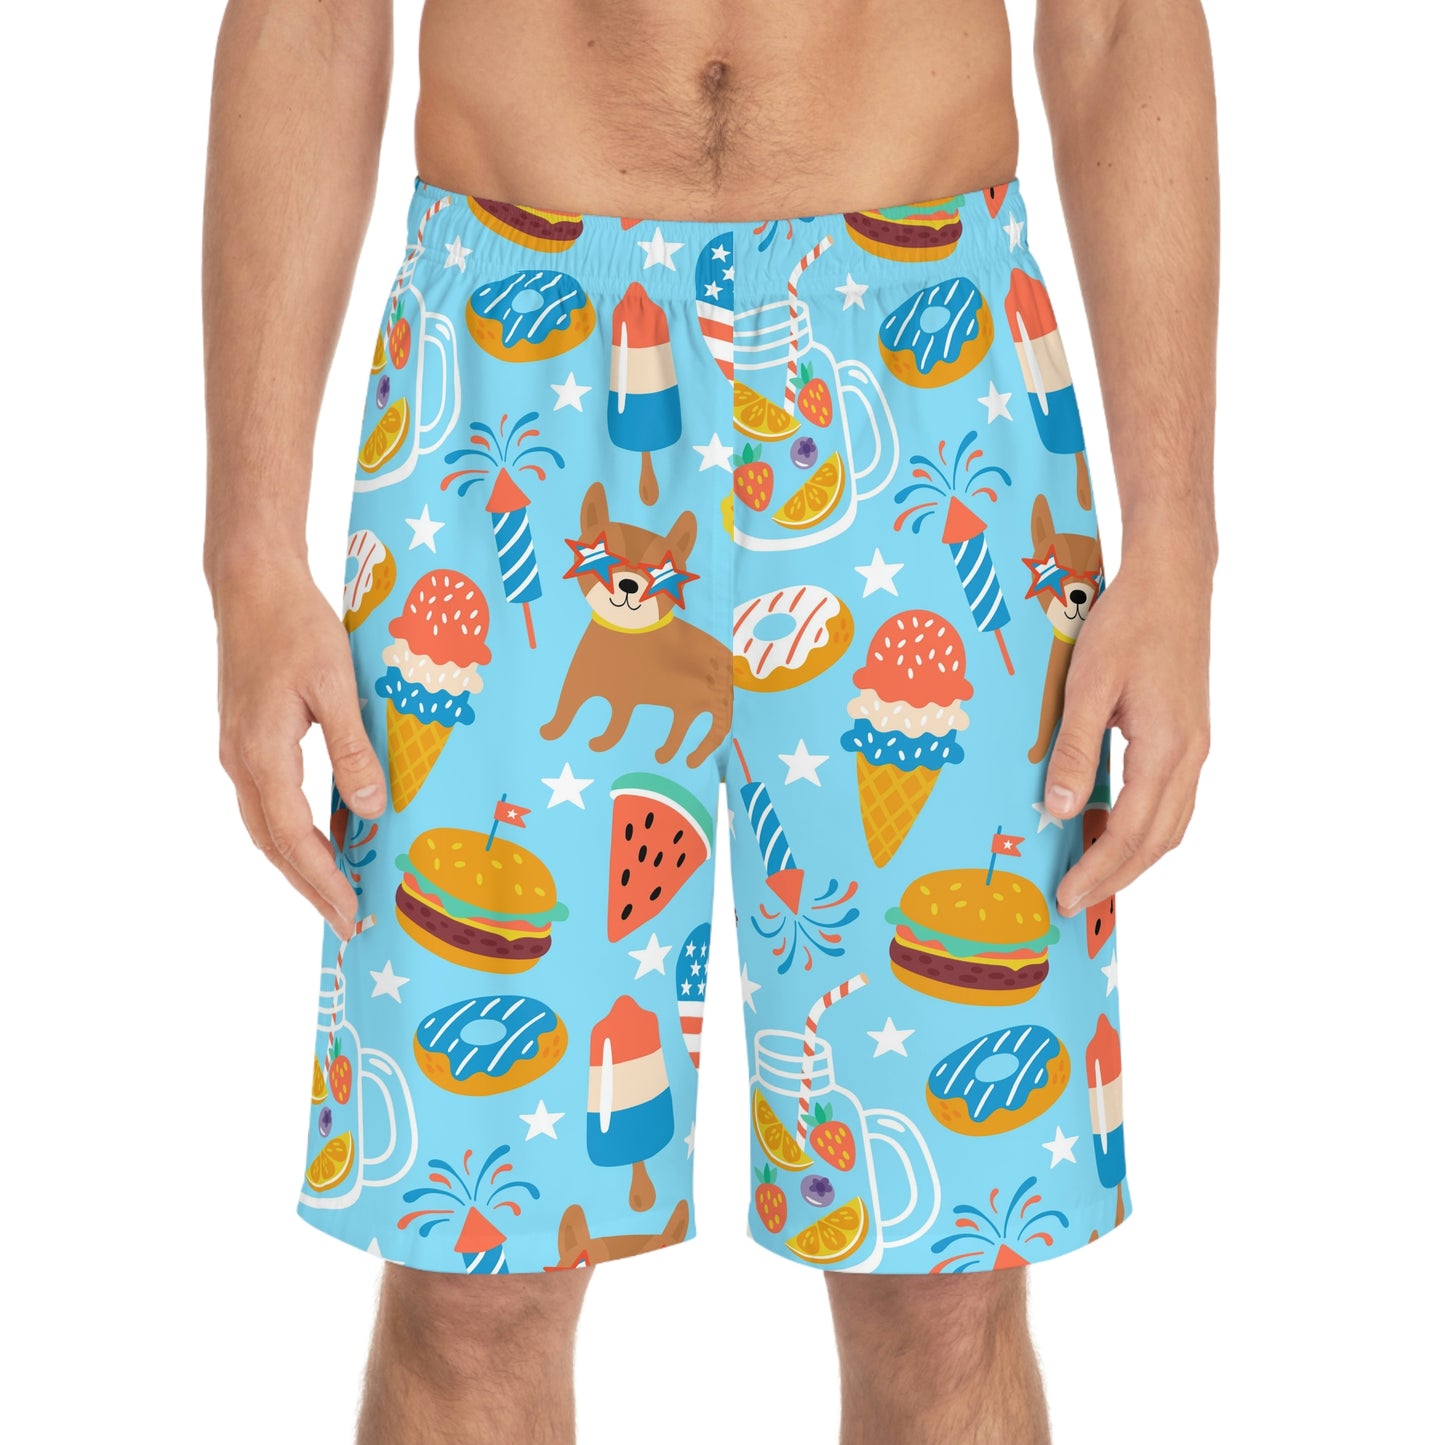 Men's 4th of July Party Board Shorts